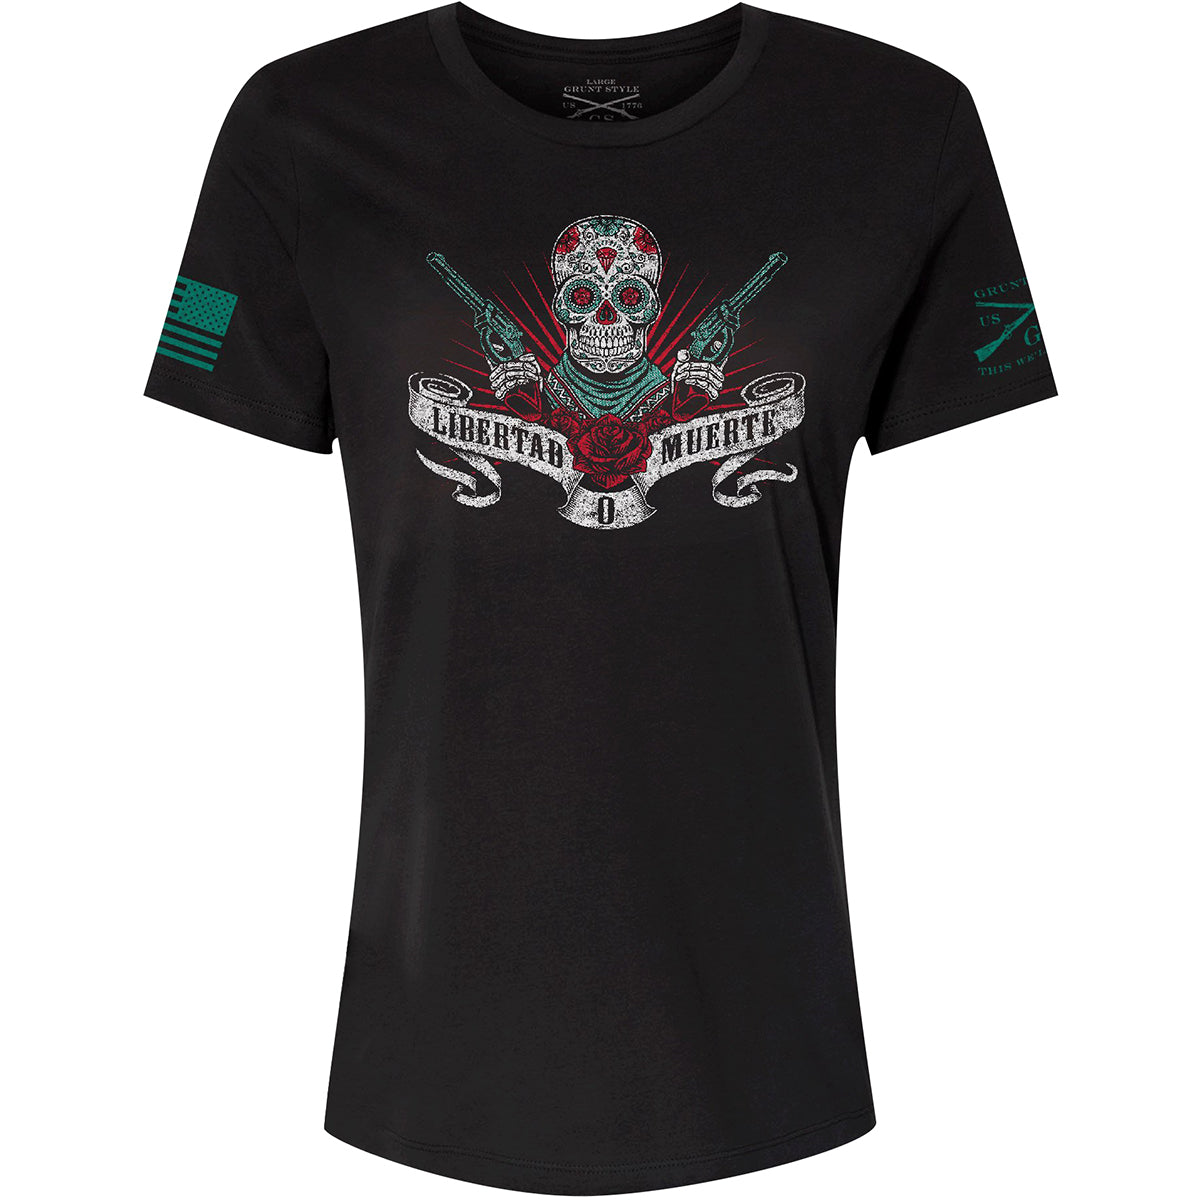 Grunt Style Women's Relaxed Fit Libertad O Muerte T-Shirt - Black Grunt Style